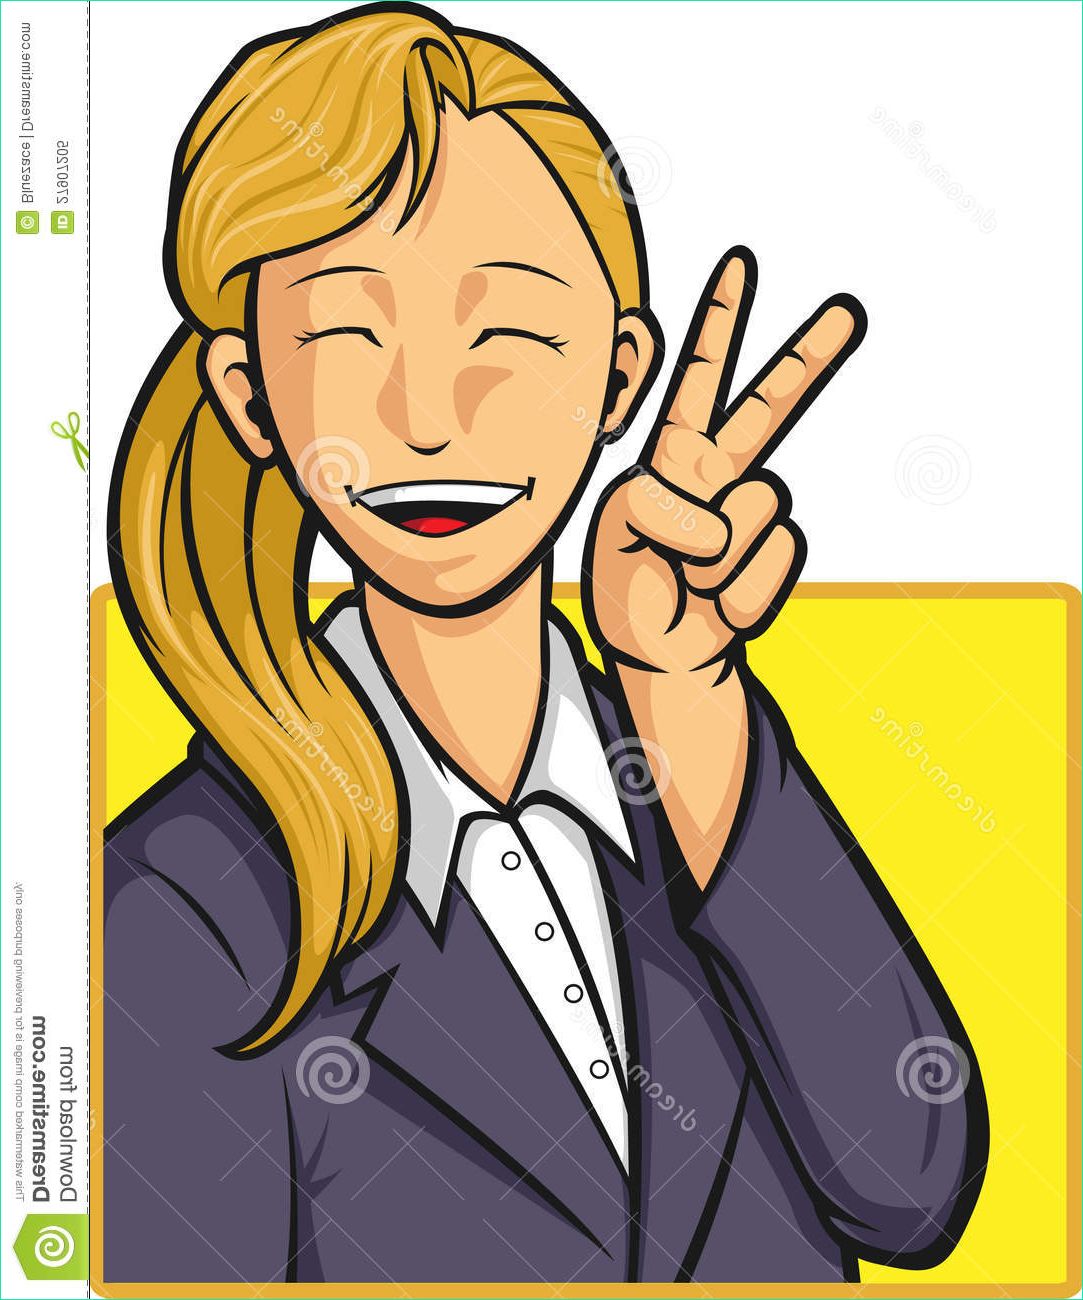 Dessin Happy Impressionnant Galerie Cartoon Happy Fice Worker Girl Royalty Free Stock